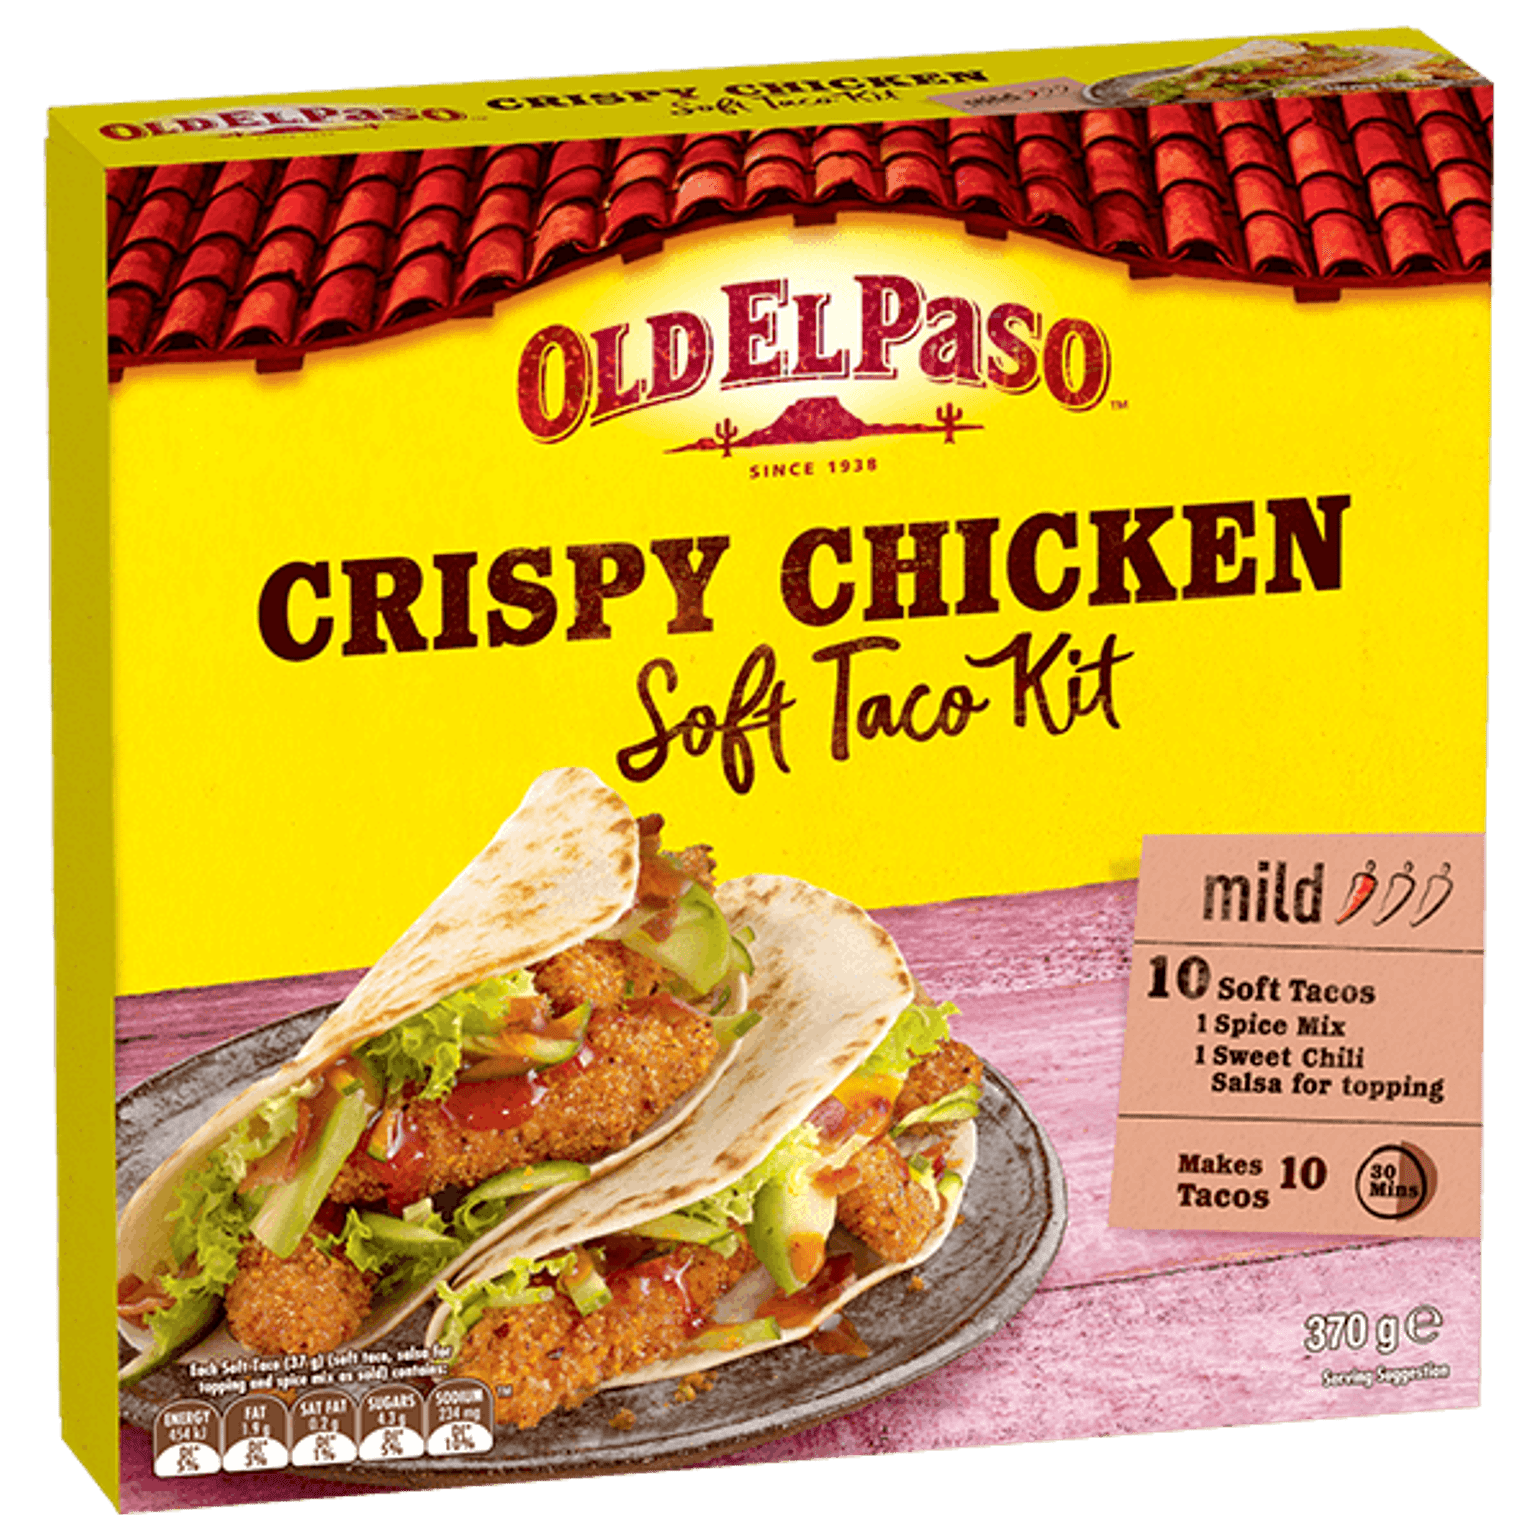 a pack of Old El Paso's crispy chicken mild soft taco kit containing soft tacos, spice mix & sweet chili salsa for topping (370g)